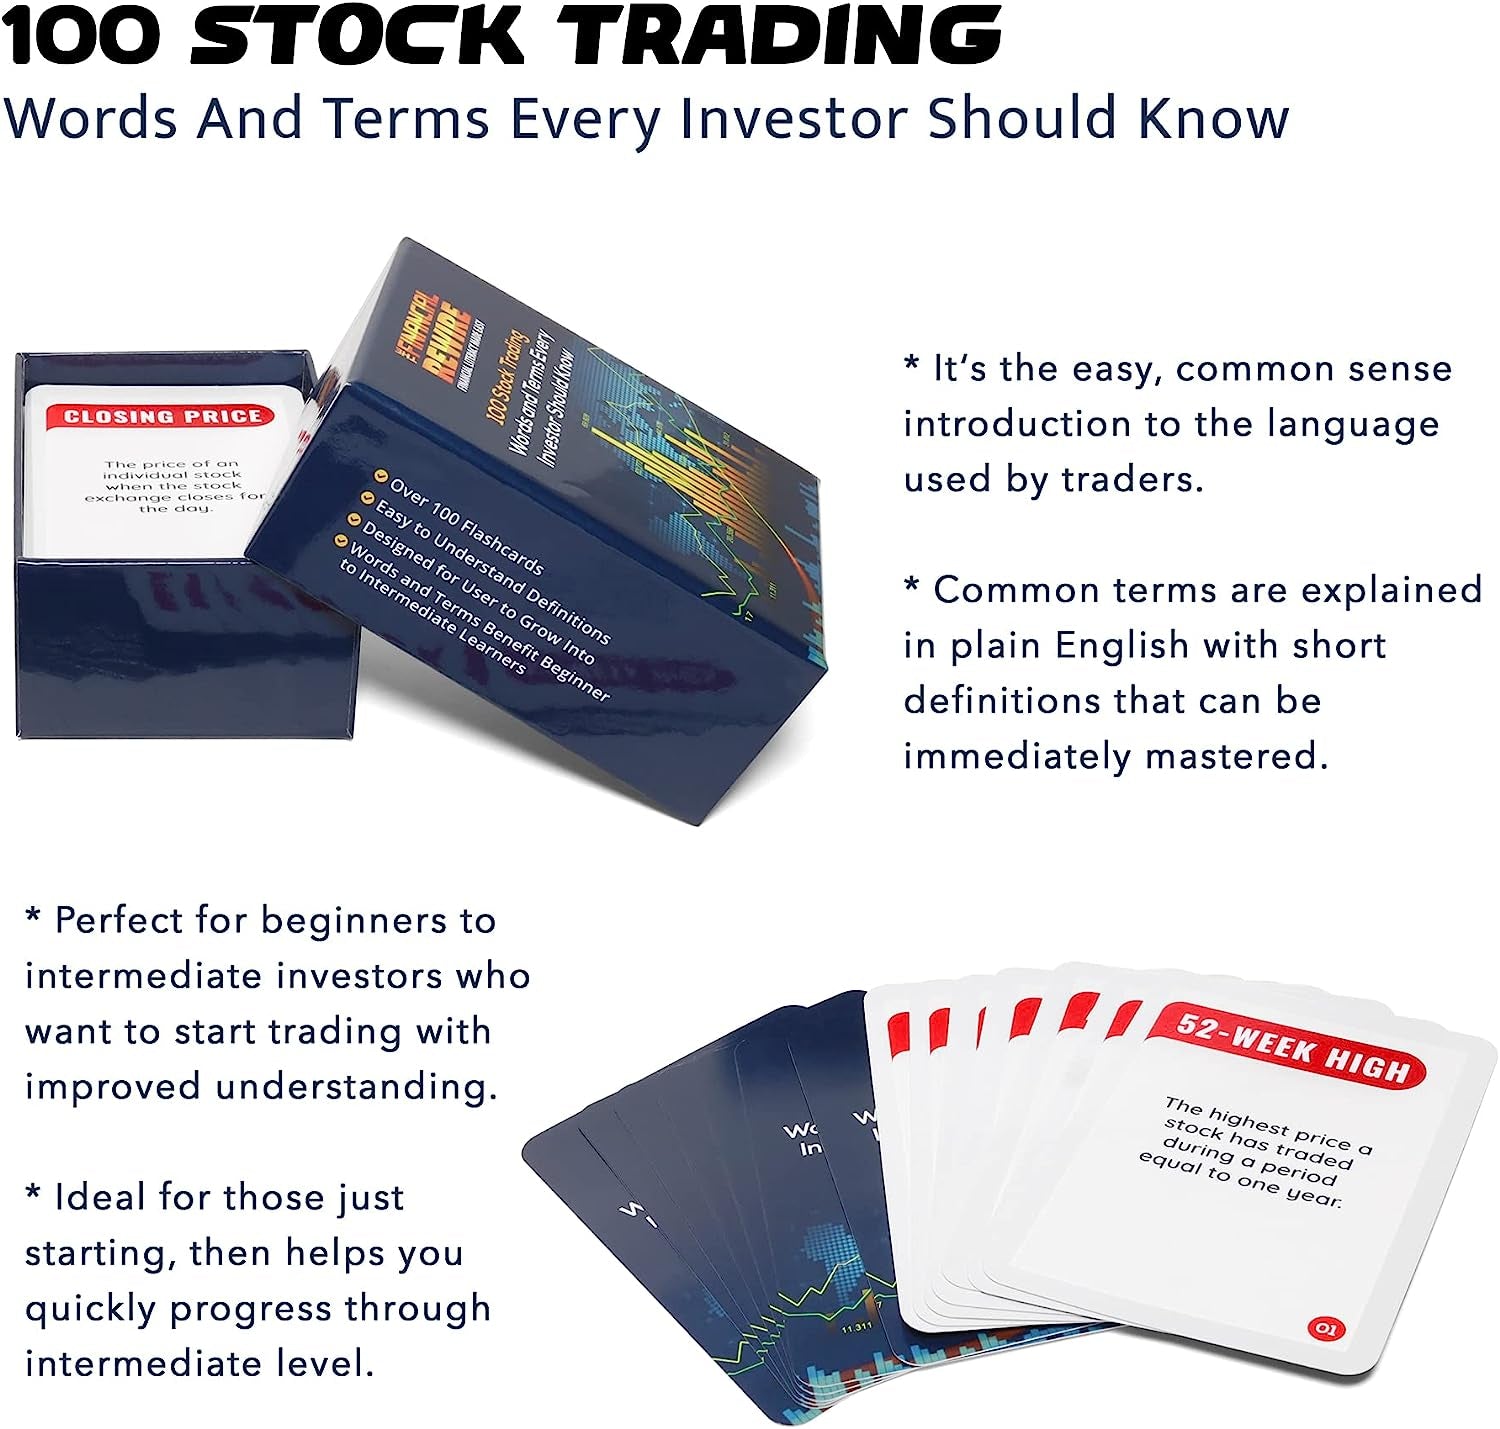 100 Stock Trading Words & Terms